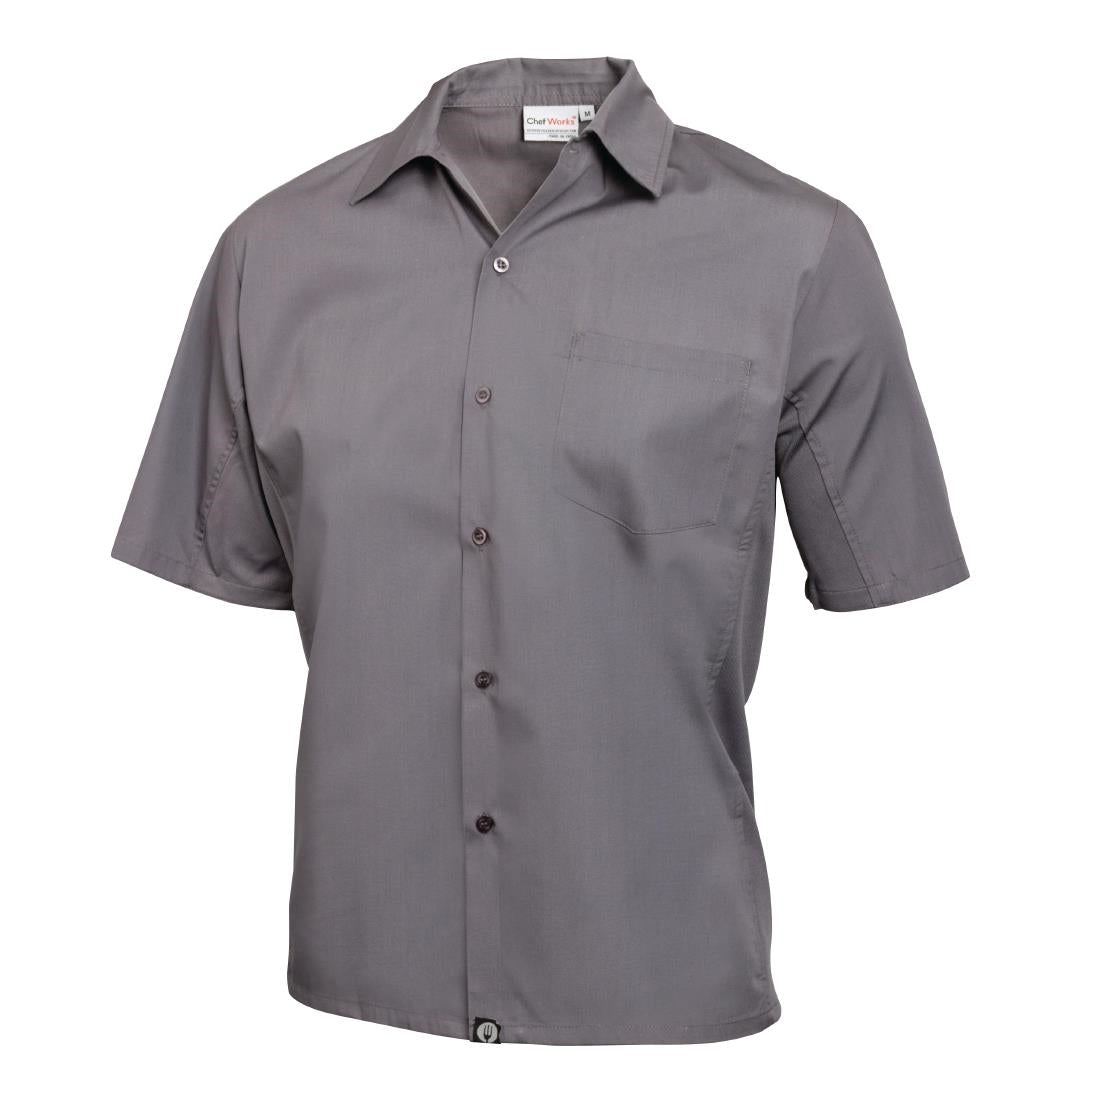 B179-M Chef Works Unisex Cool Vent Chefs Shirt Grey M JD Catering Equipment Solutions Ltd